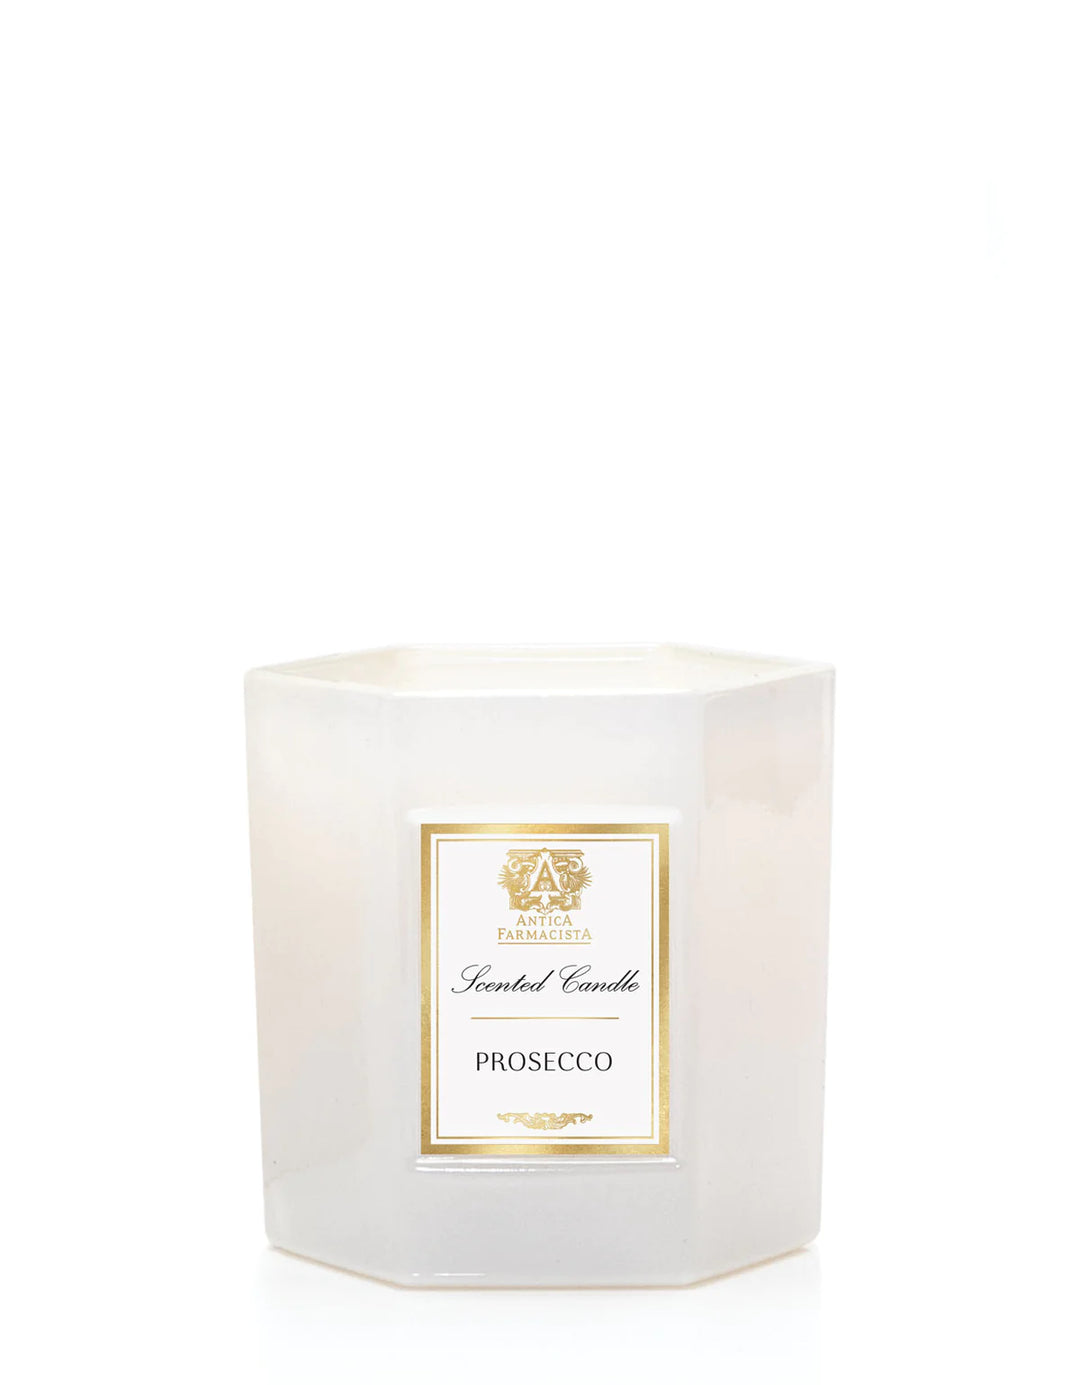 Prosecco Scented Candle